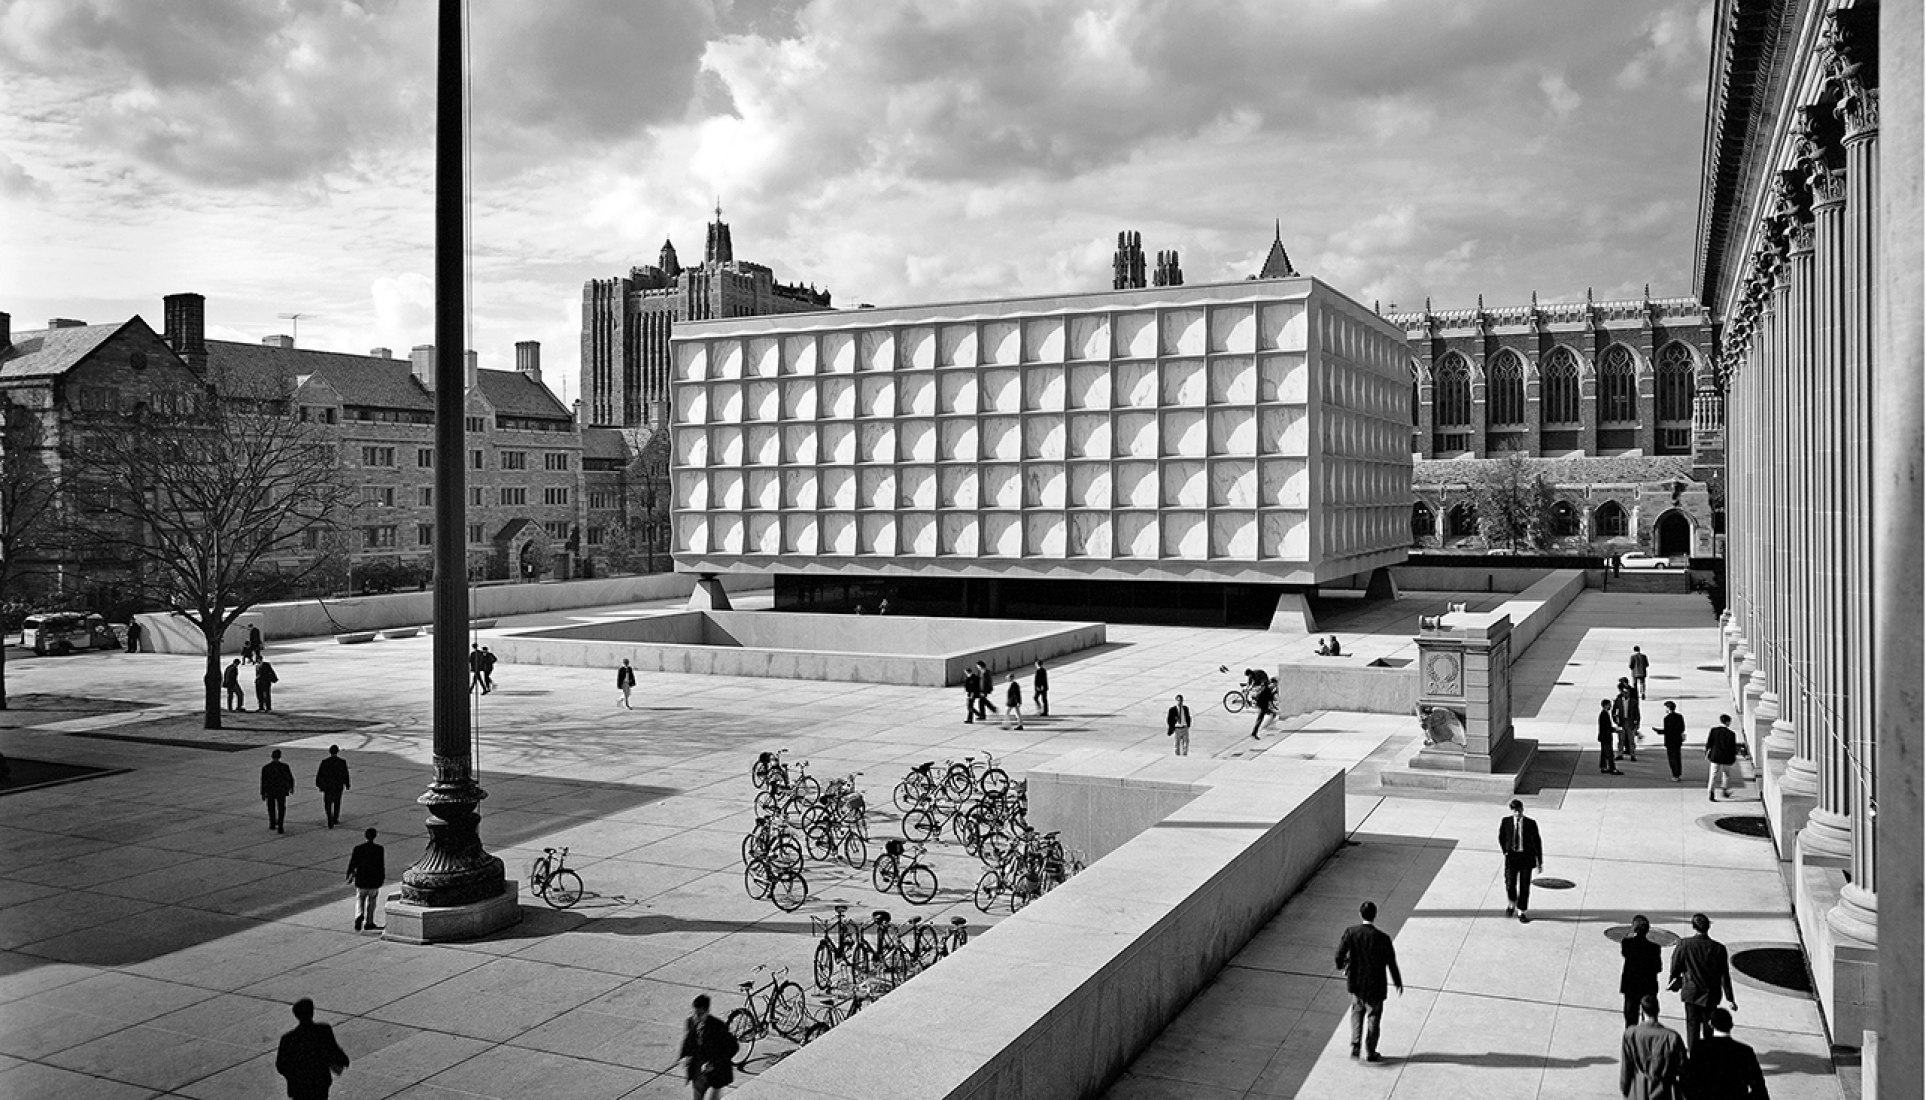 Photograph of the Beinecke building and plaza. Beinecke Rare Book & Manuscript Library, circa 1965. Beinecke Rare Book and Manuscript Library Skidmore, Owings, & Merrill. Images by Ezra Stoller of Esto Photographics.